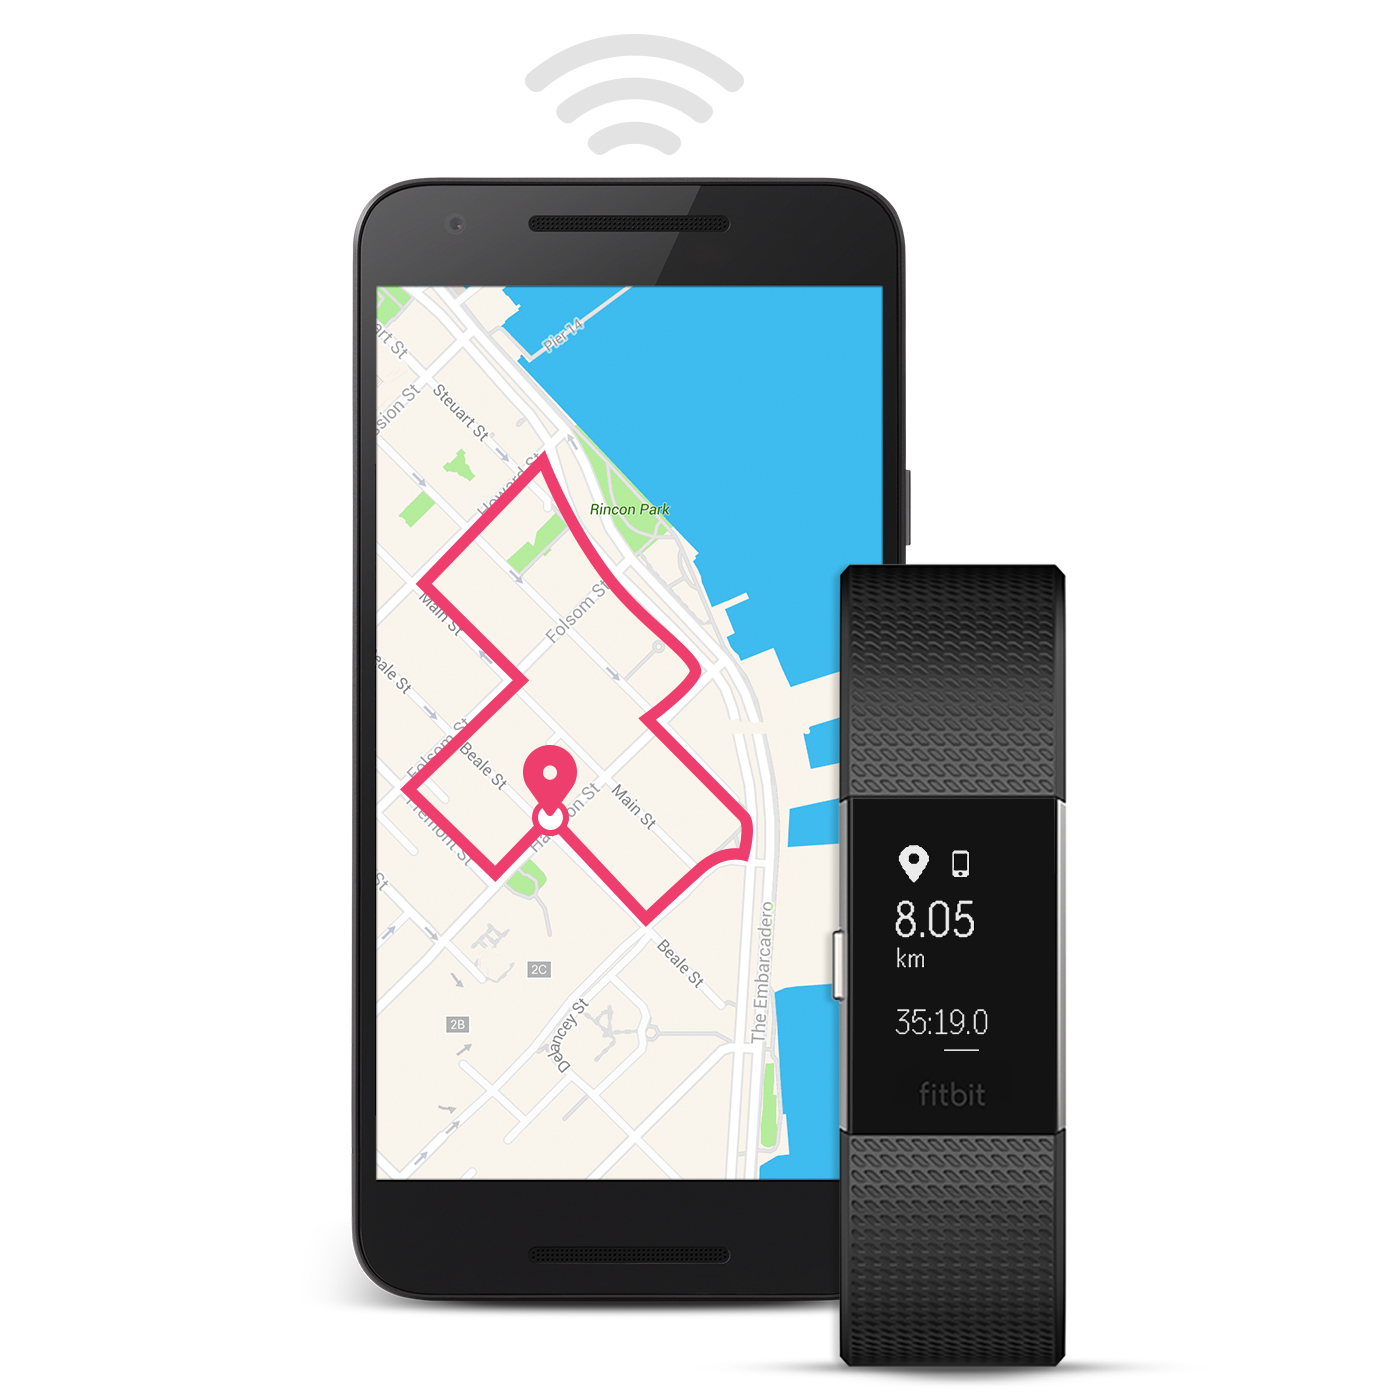 fitbit track running